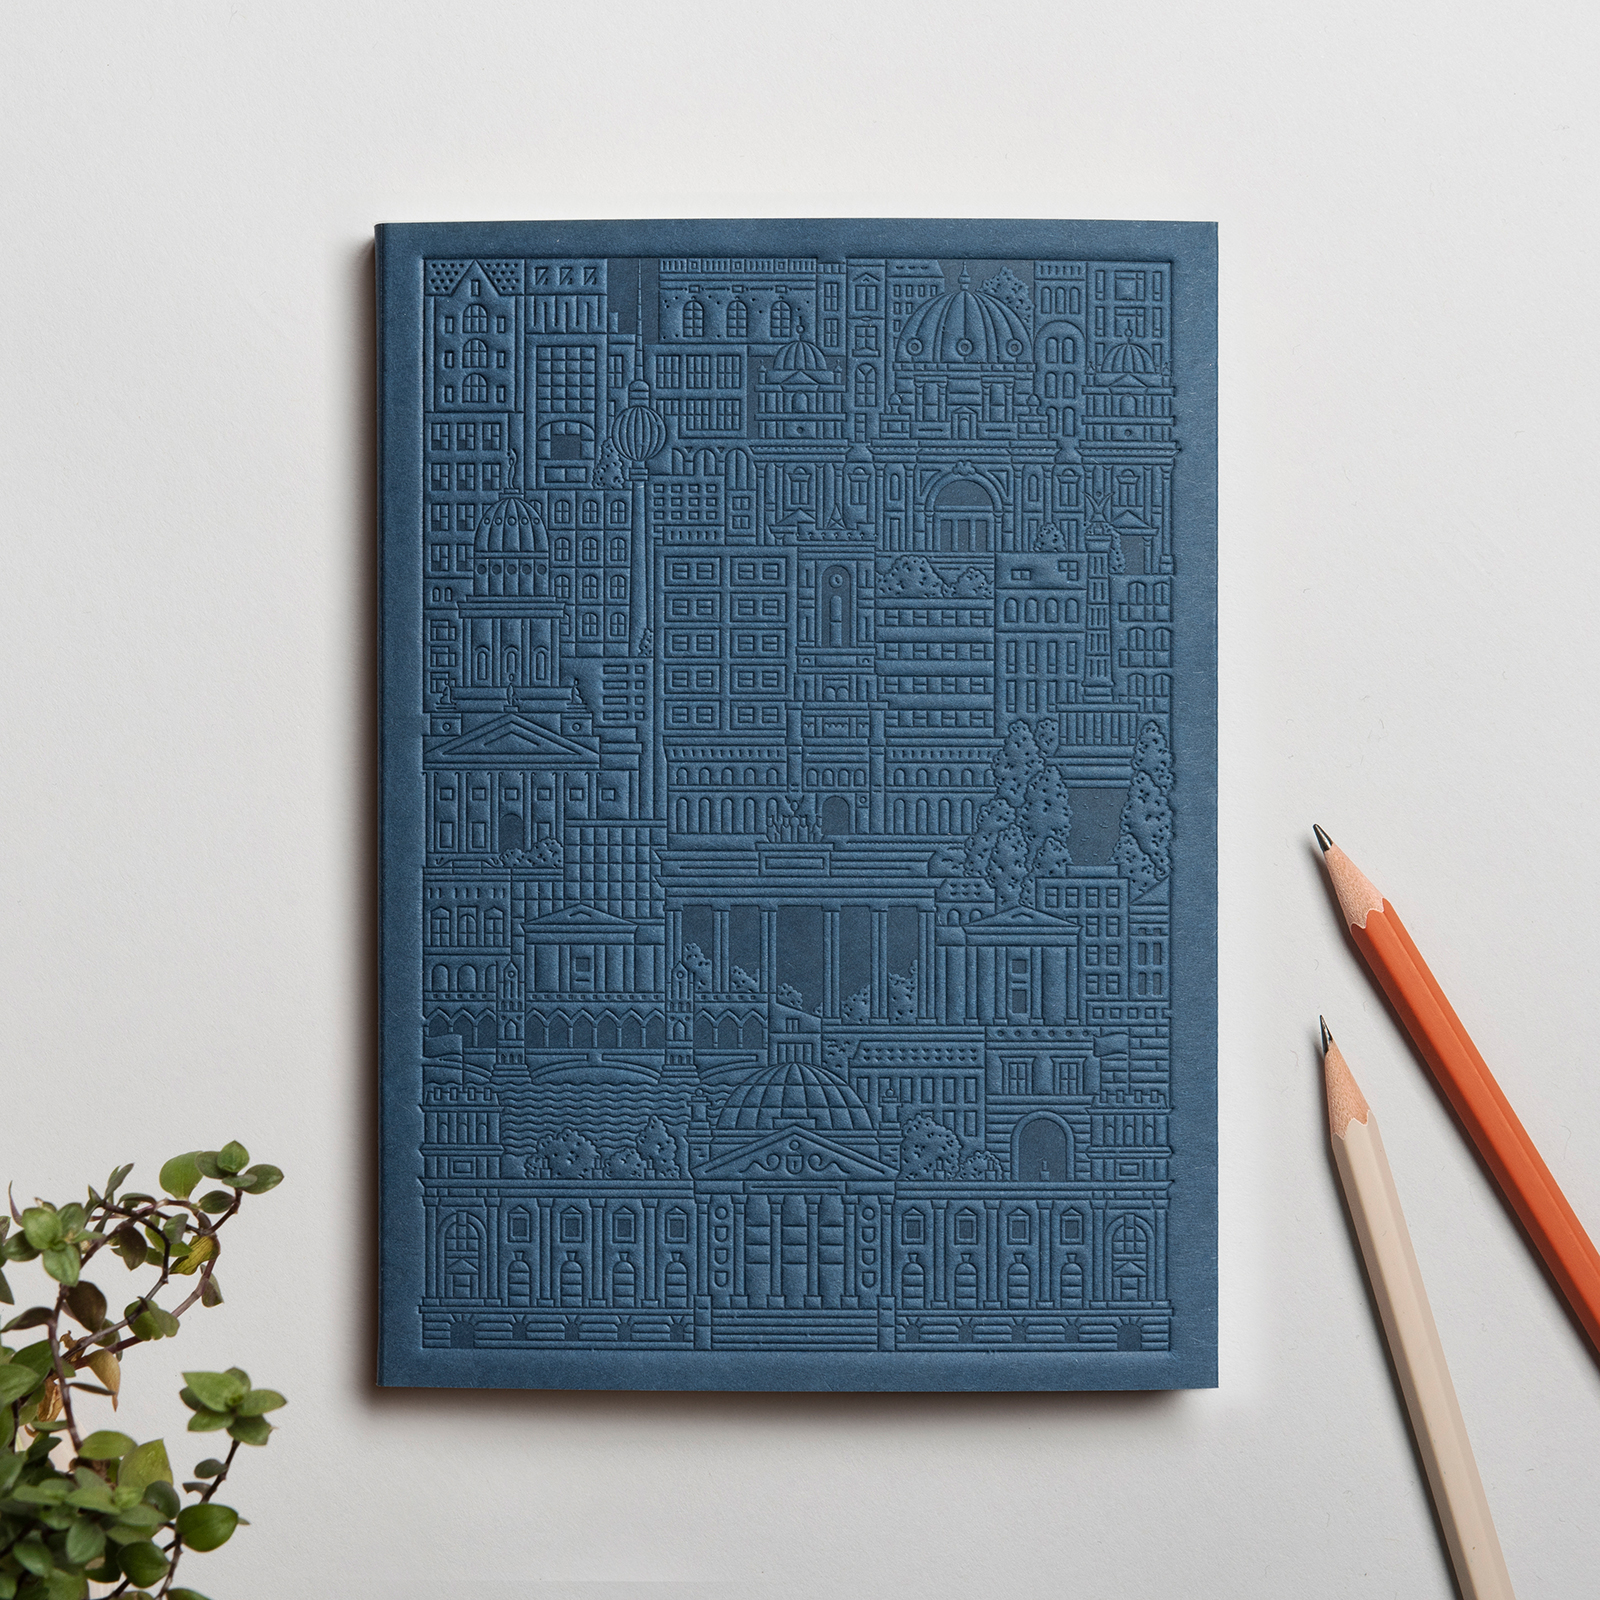 The Berlin Journal by The City Works